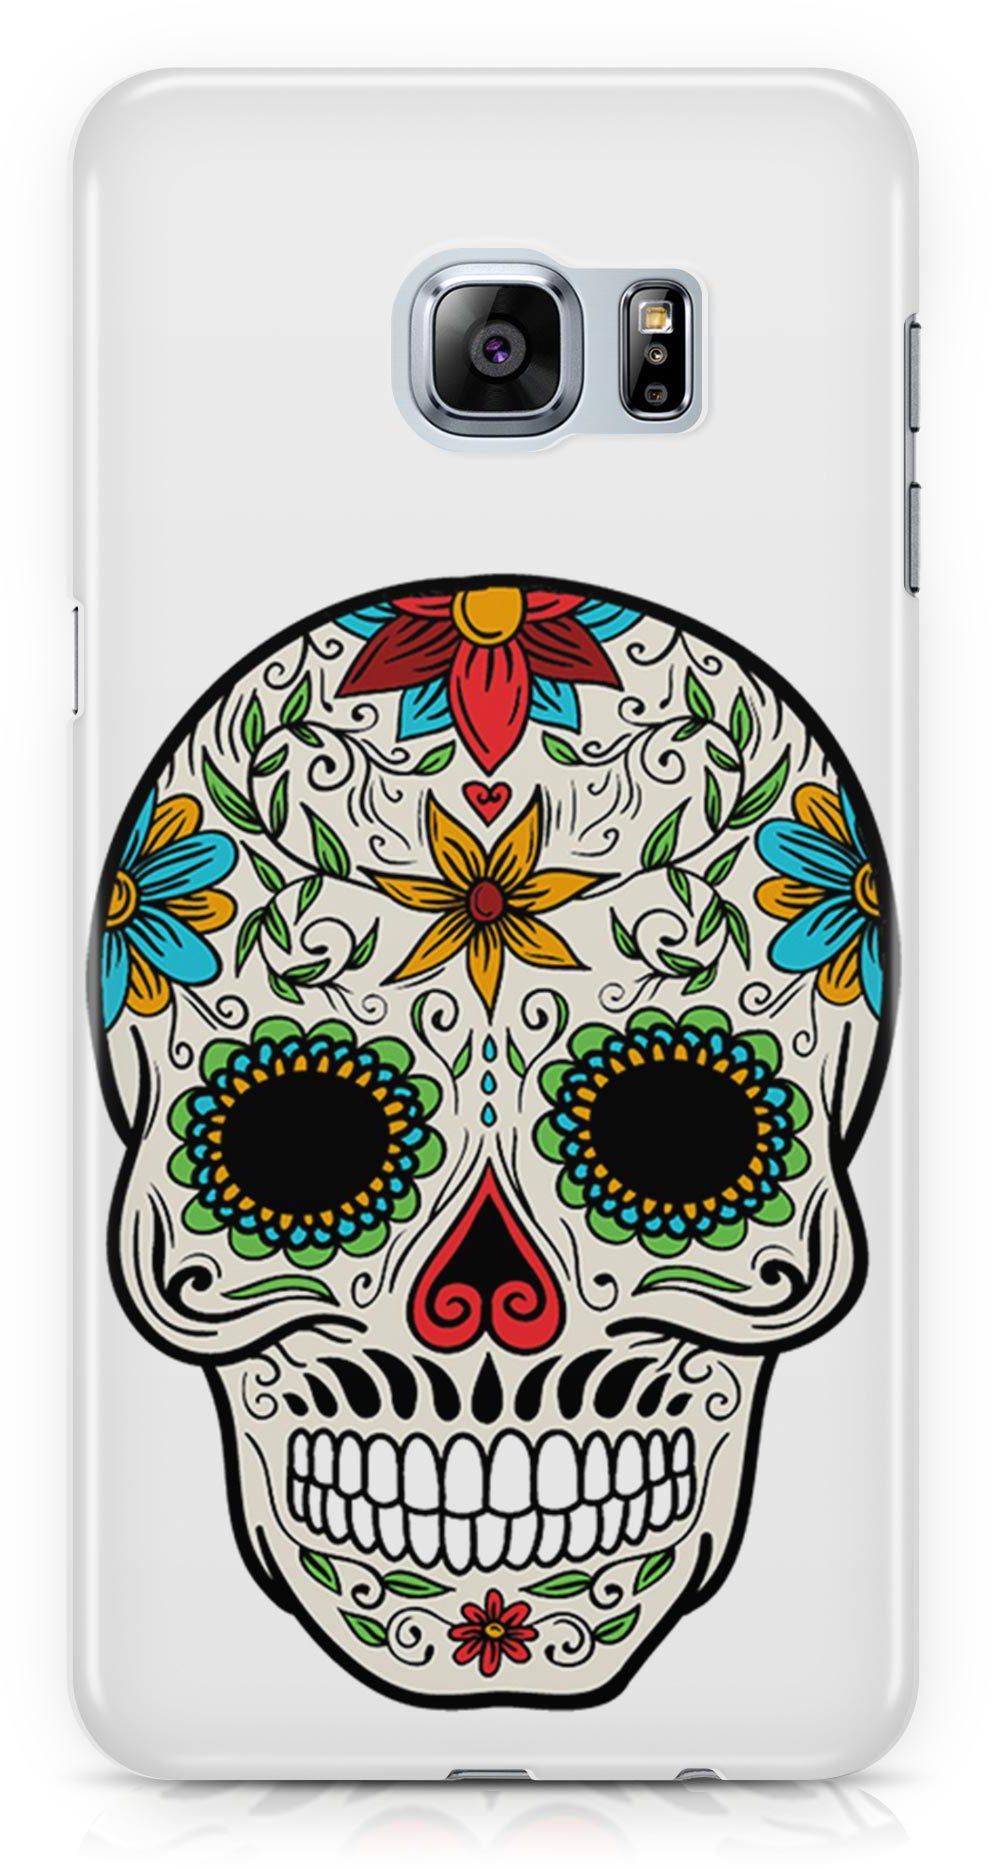 The Skull of Flowers Rock Music Tattoo Phone Case for Samsung S6